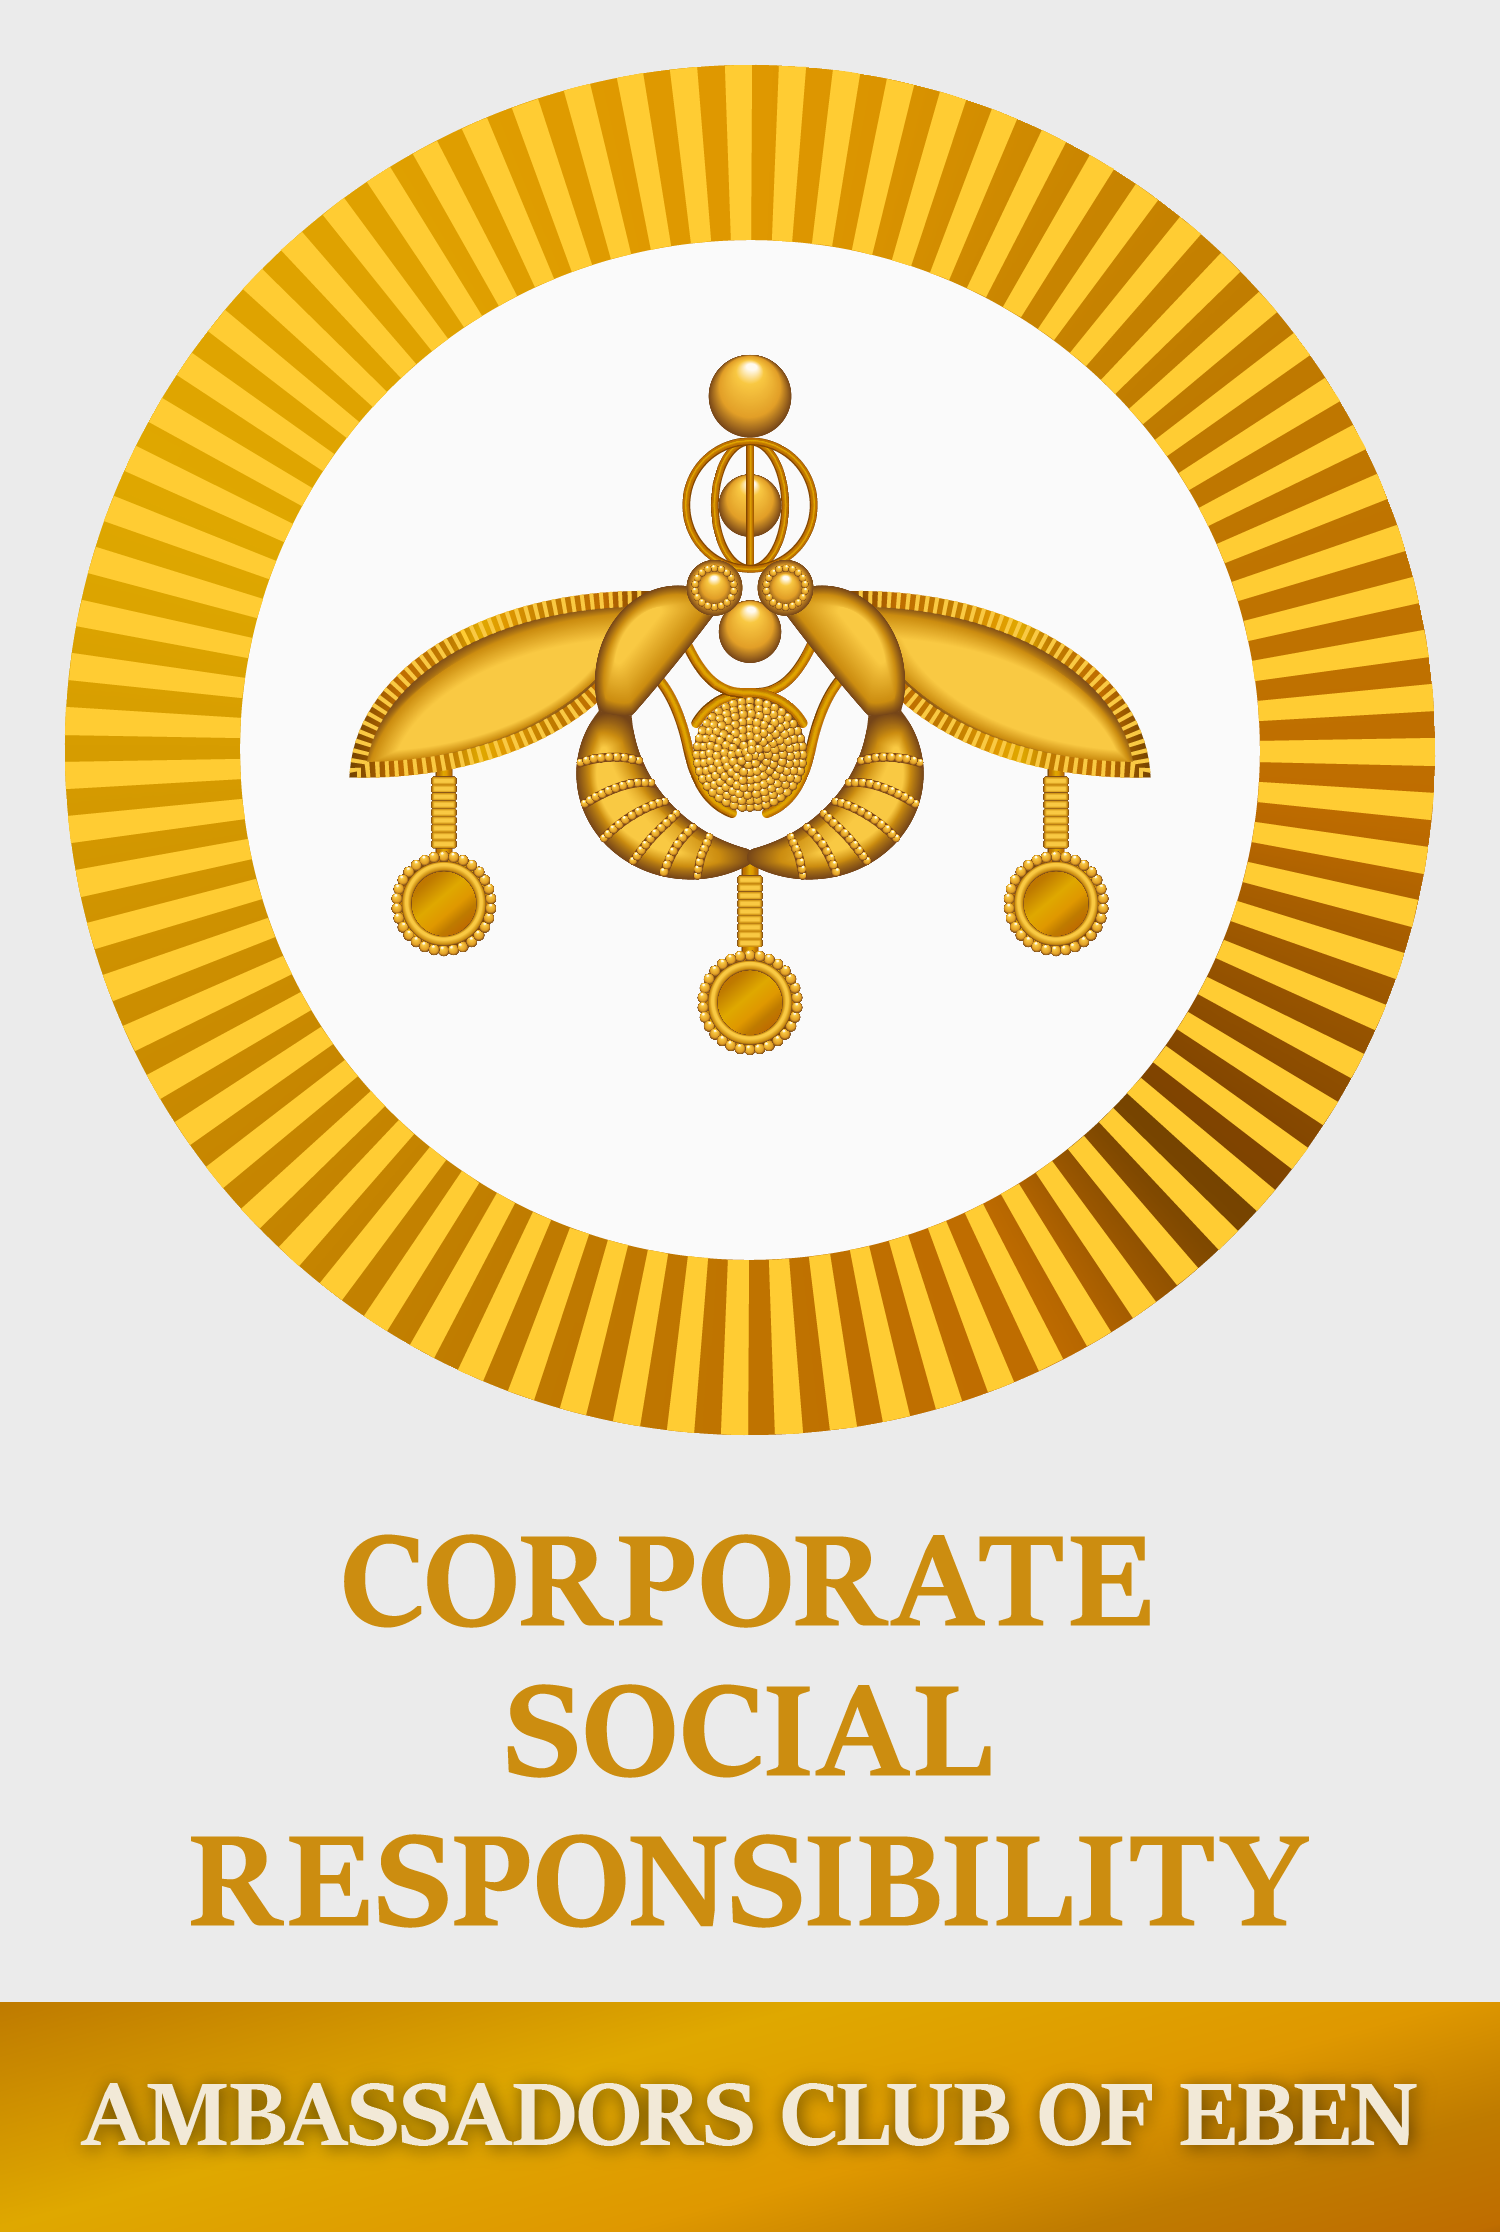 CERTIFIED AWARDS IN CORPORATE SOCIAL RESPONSIBILITY